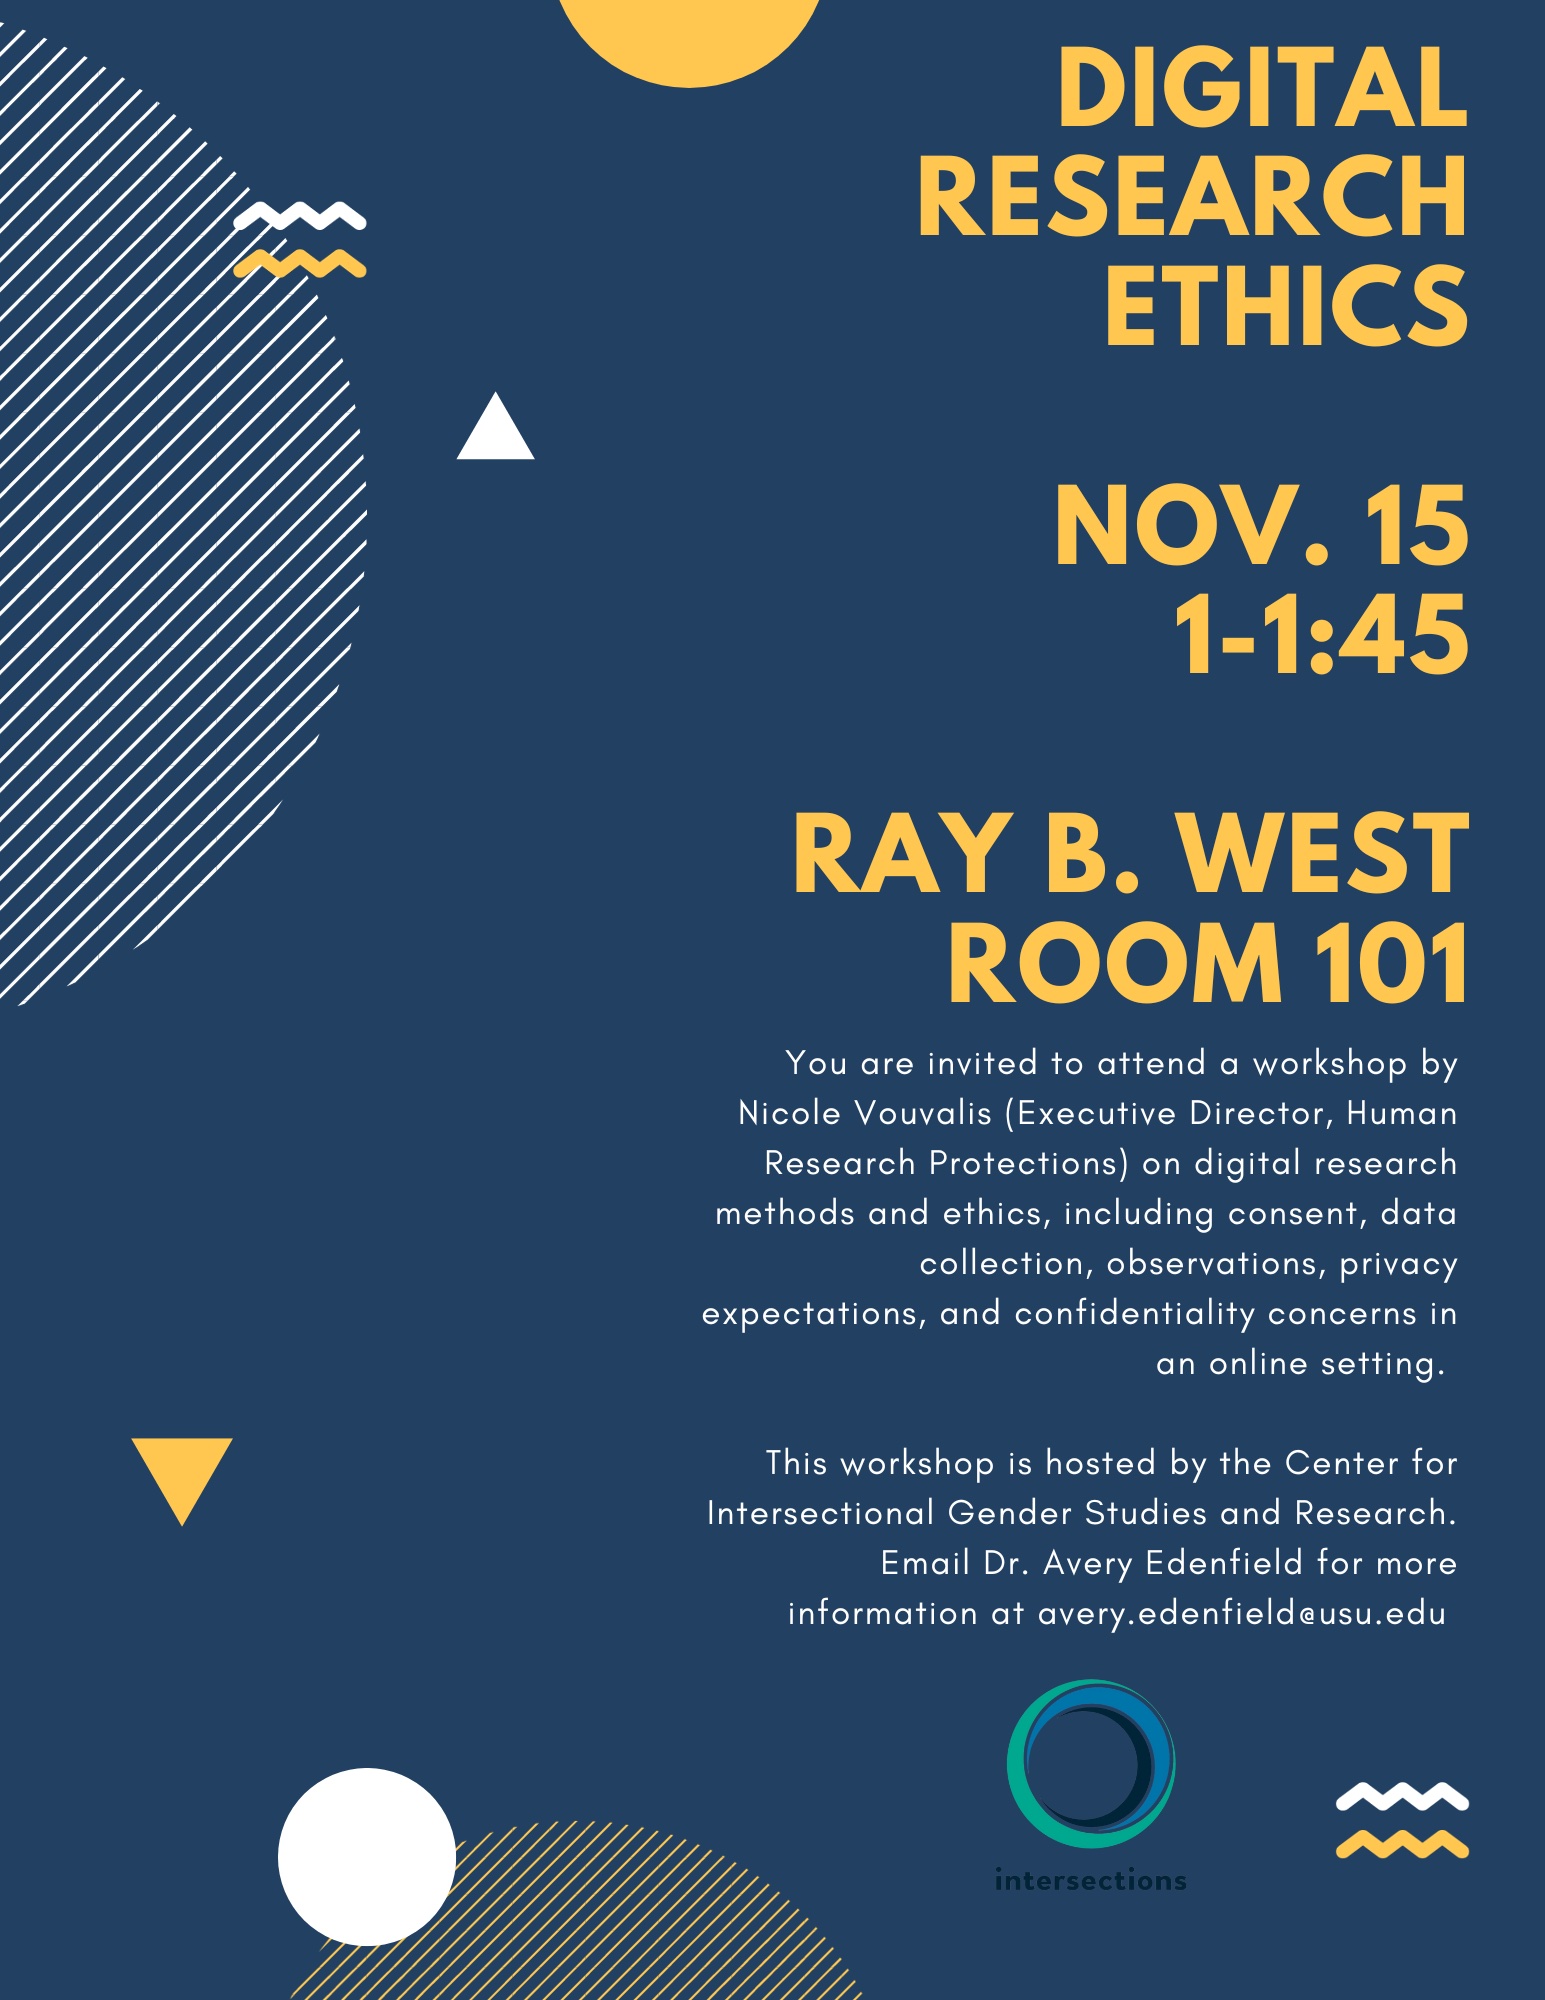 Digital Research Ethics Workshop November 15th 1-1:45pm  Ray B West Room 101  You are invited to attend a workshop by Nicole Vouvalis (Executive Director, Human Research Protections) on digital research methods and ethics, including consent, data collection, observations, privacy expectations, and confidentiality concerns in an online setting.